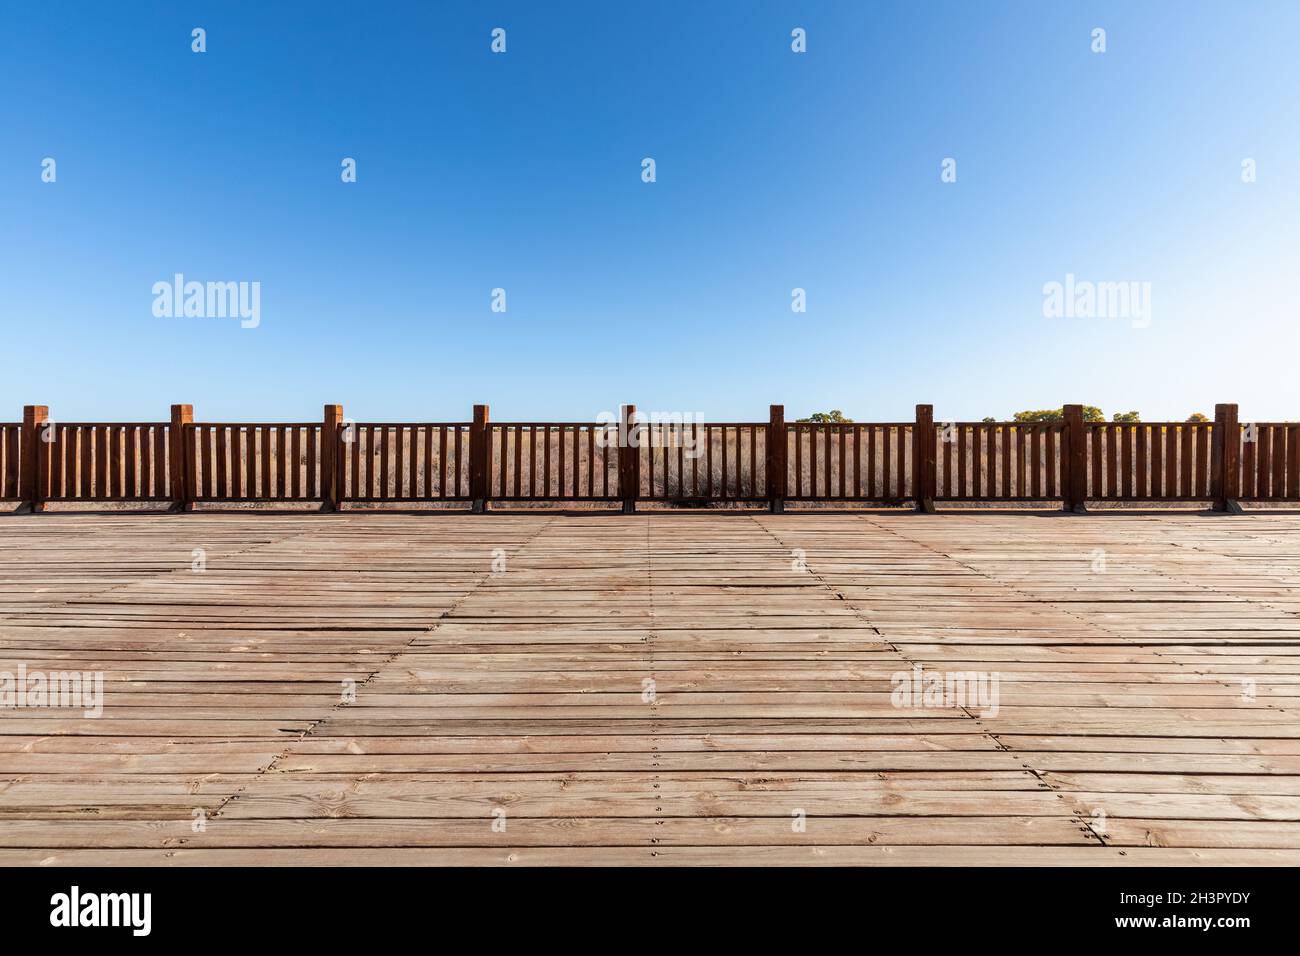 Wood floor and wooden railings in outdoor park Stock Photo